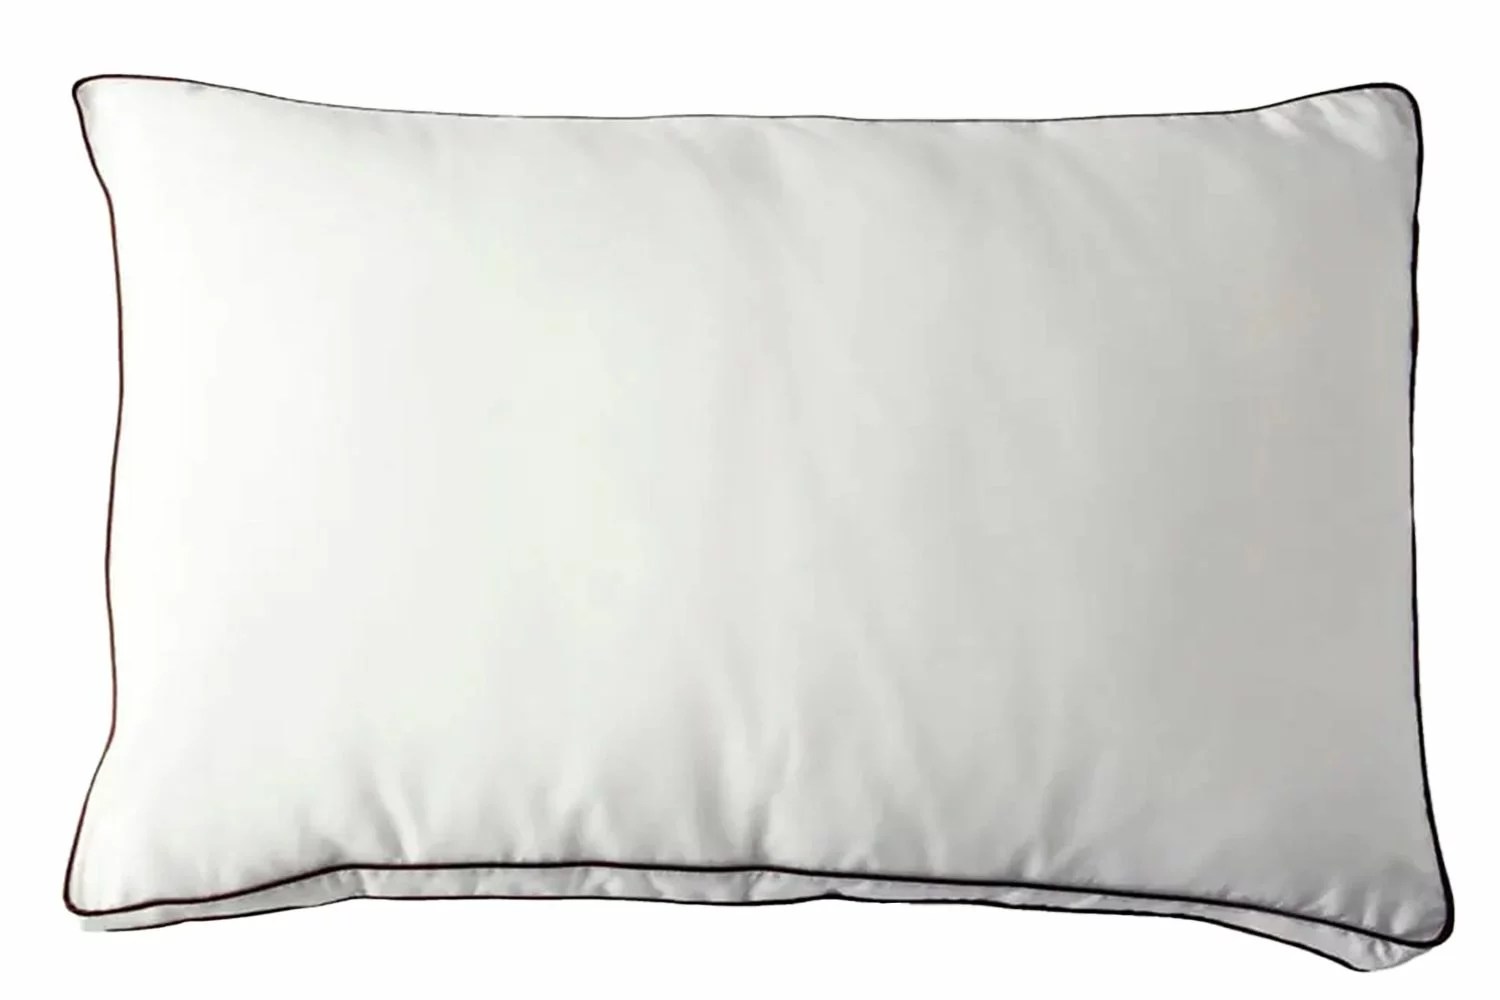 saatva latex pillow, one of the best pillows for side sleepers